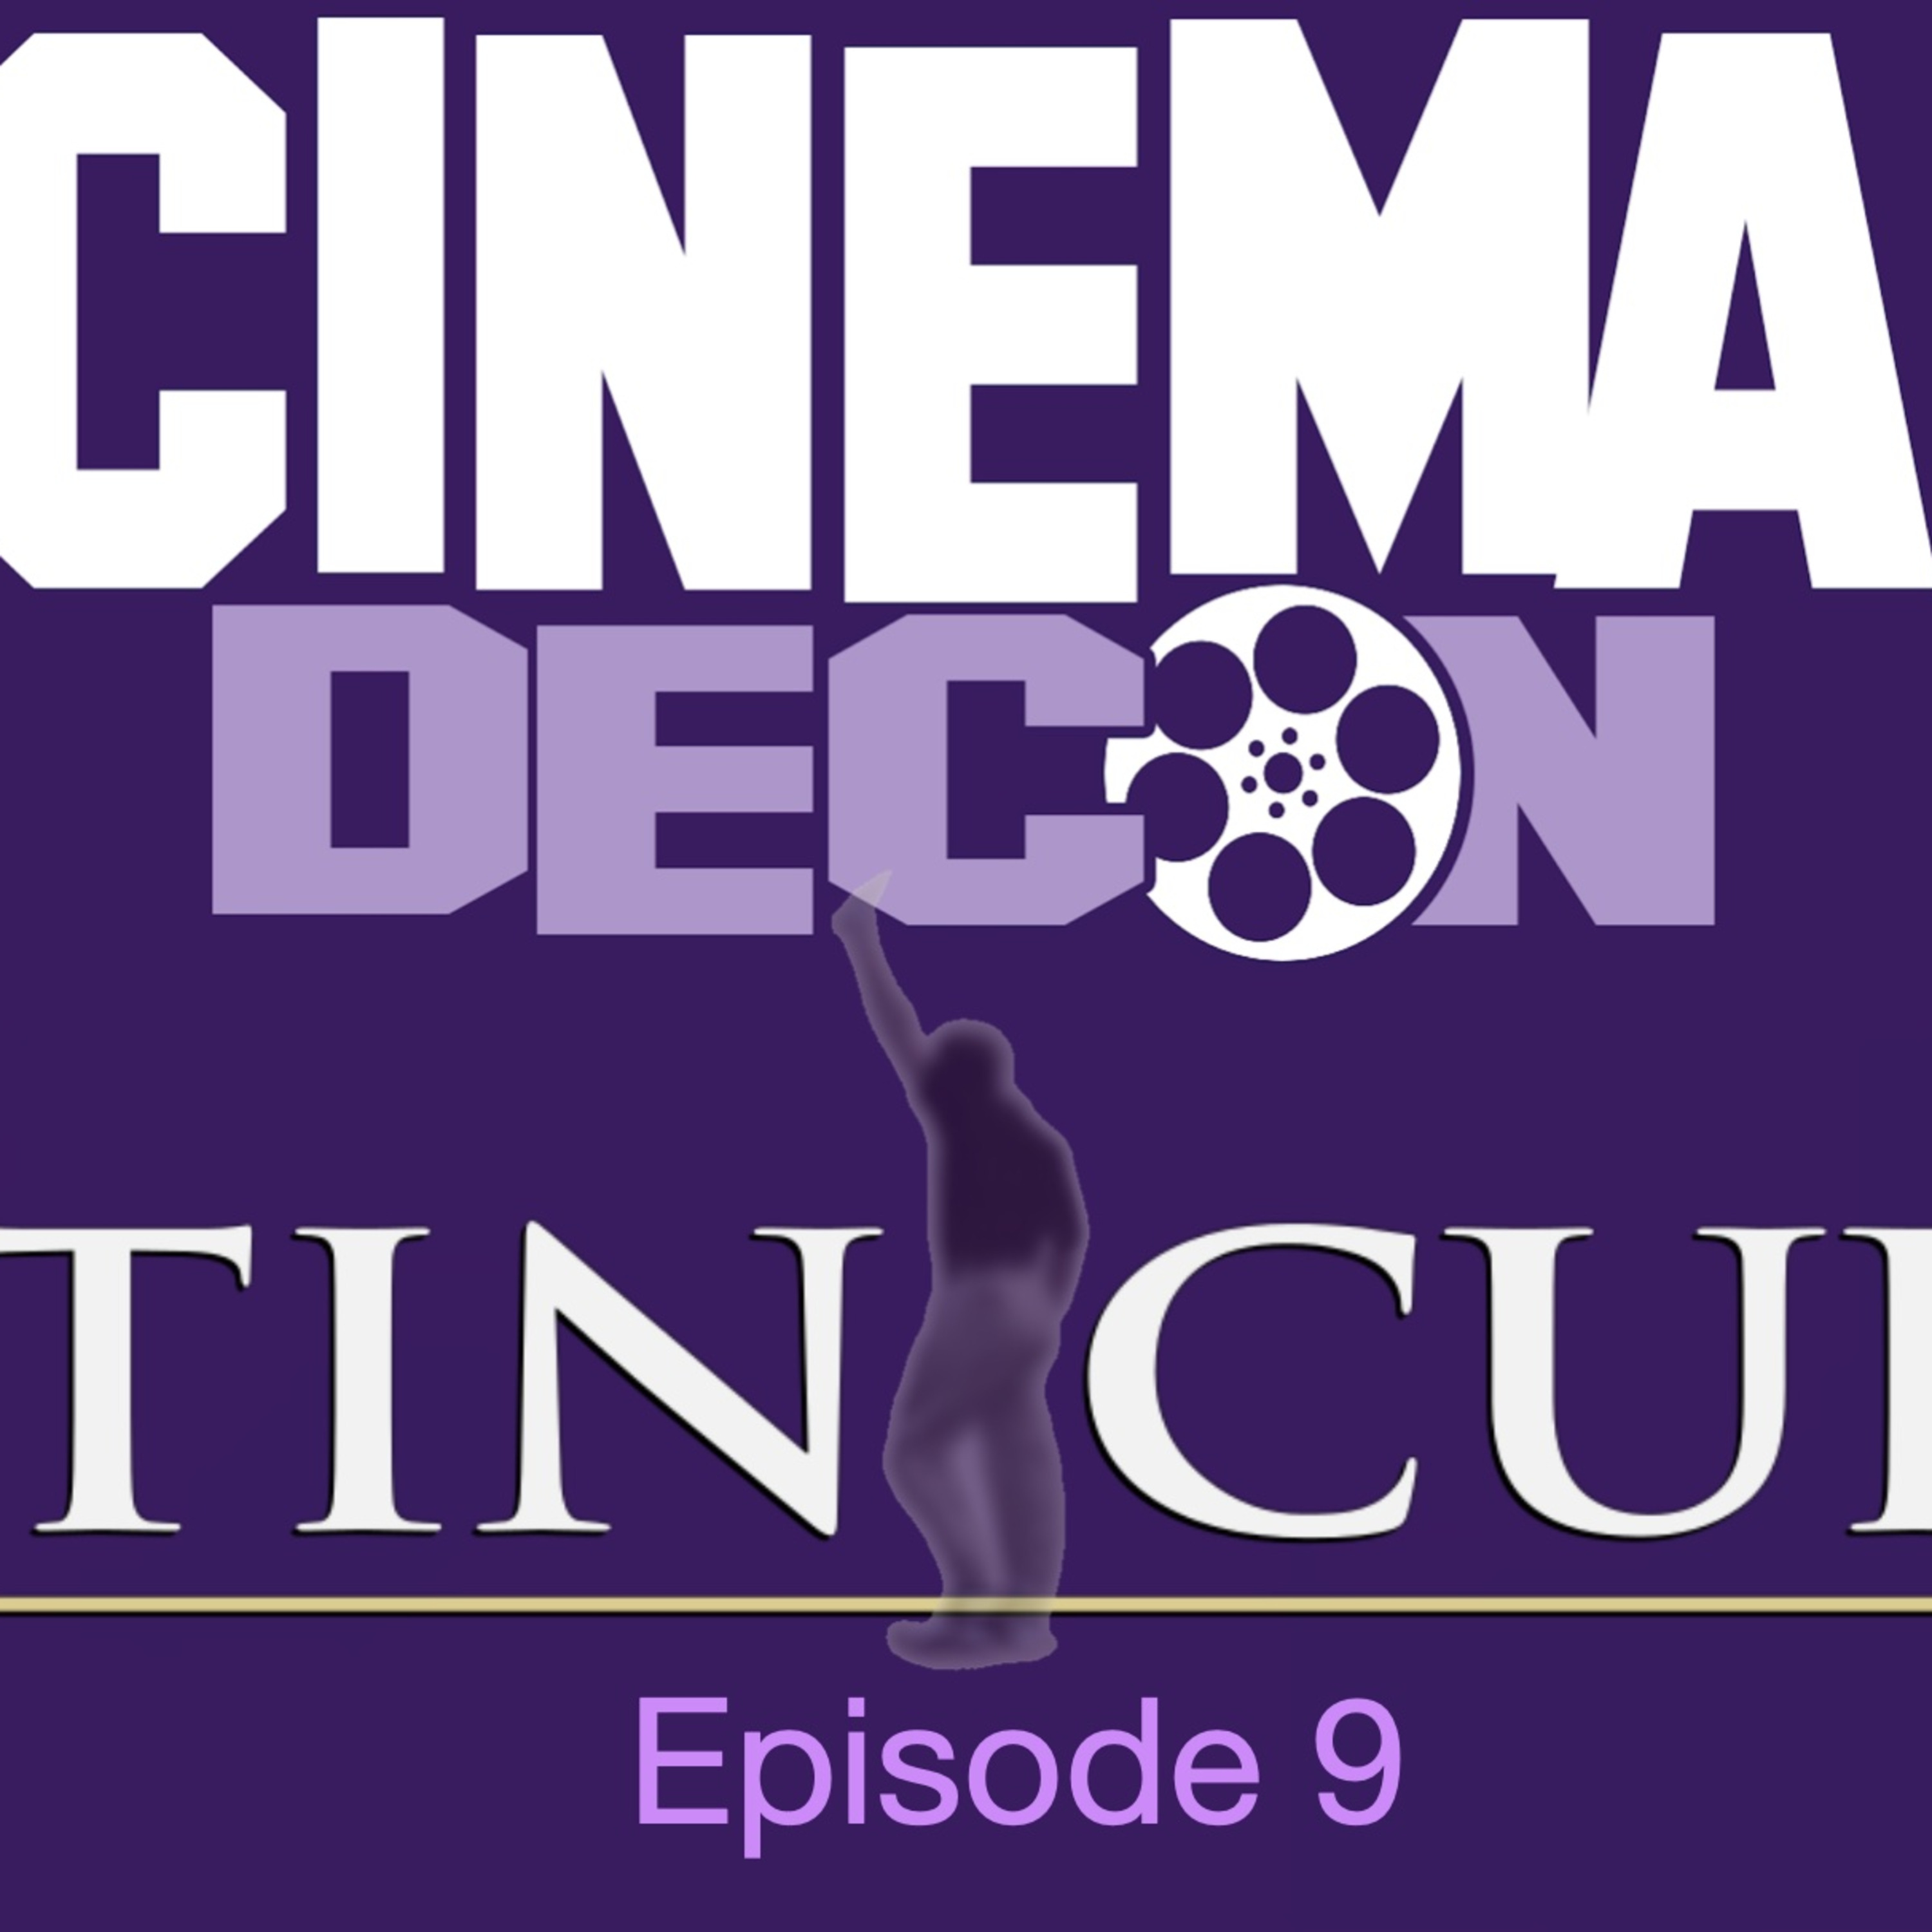 Episode 9: Tin Cup (1996) - Movie Review and Analysis